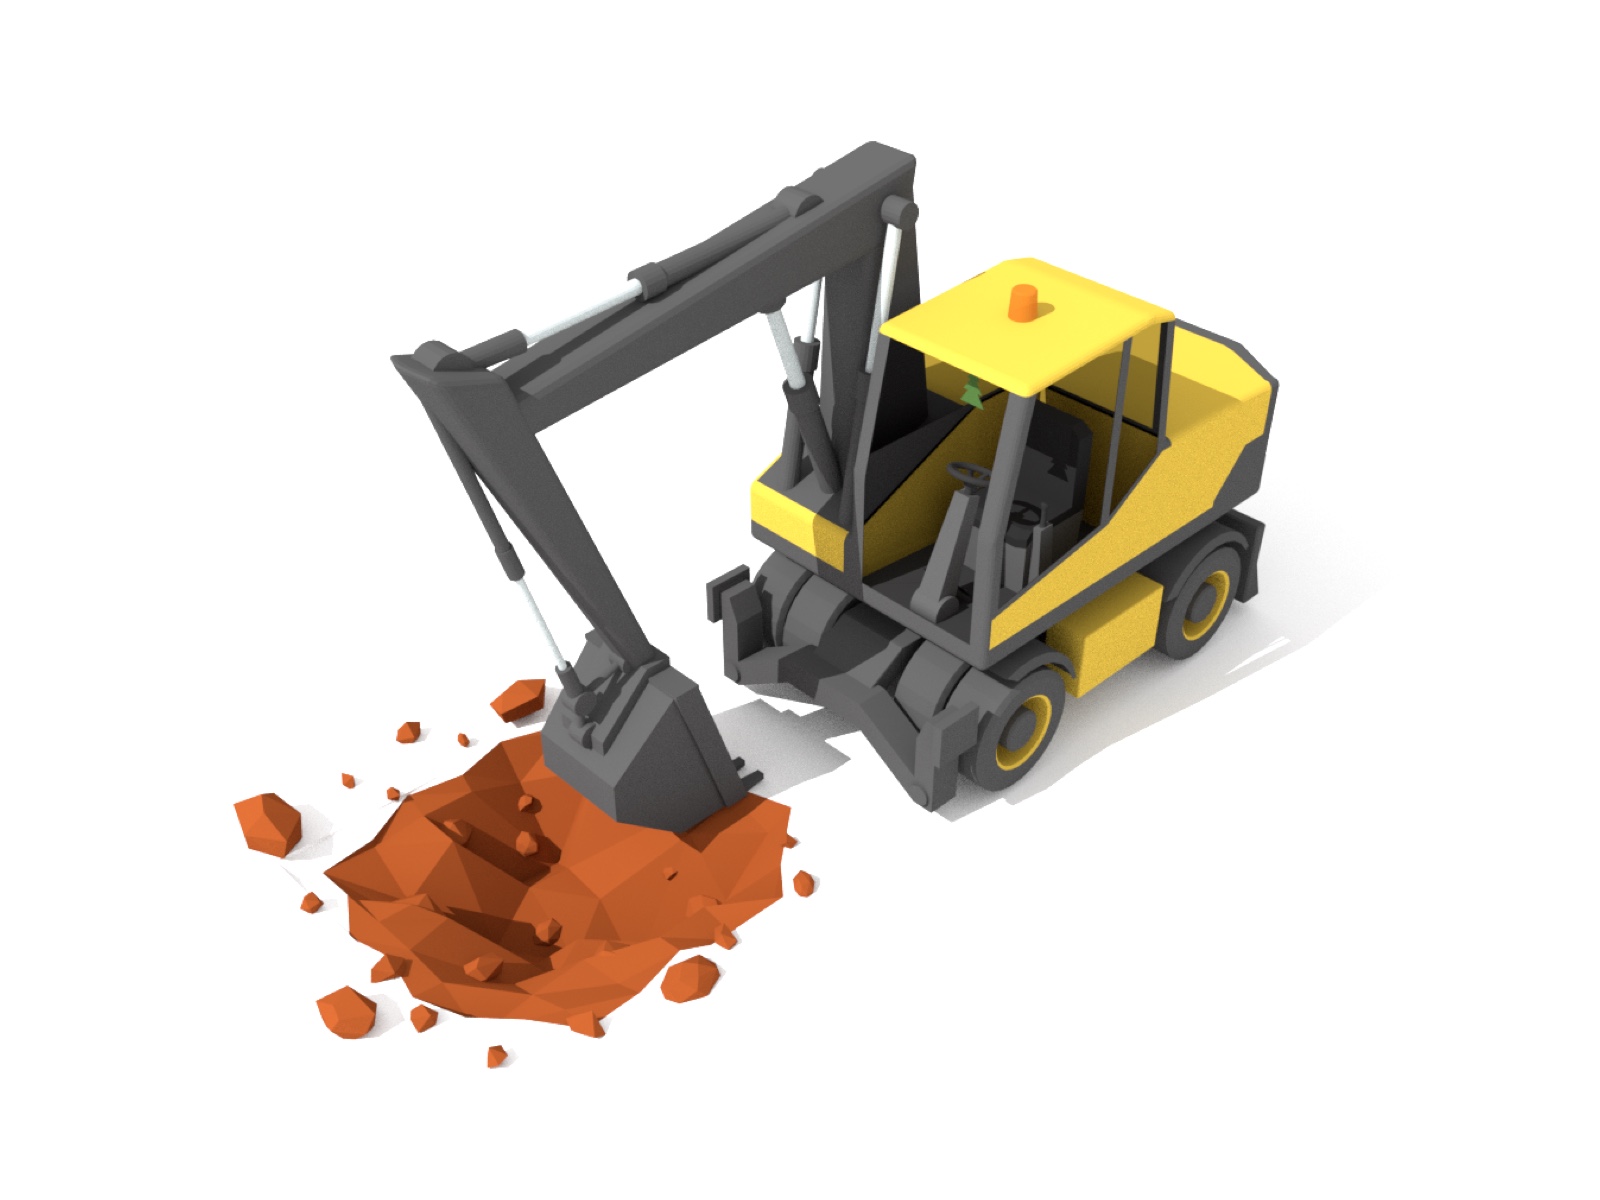 A 3 dimensional model of an excavator